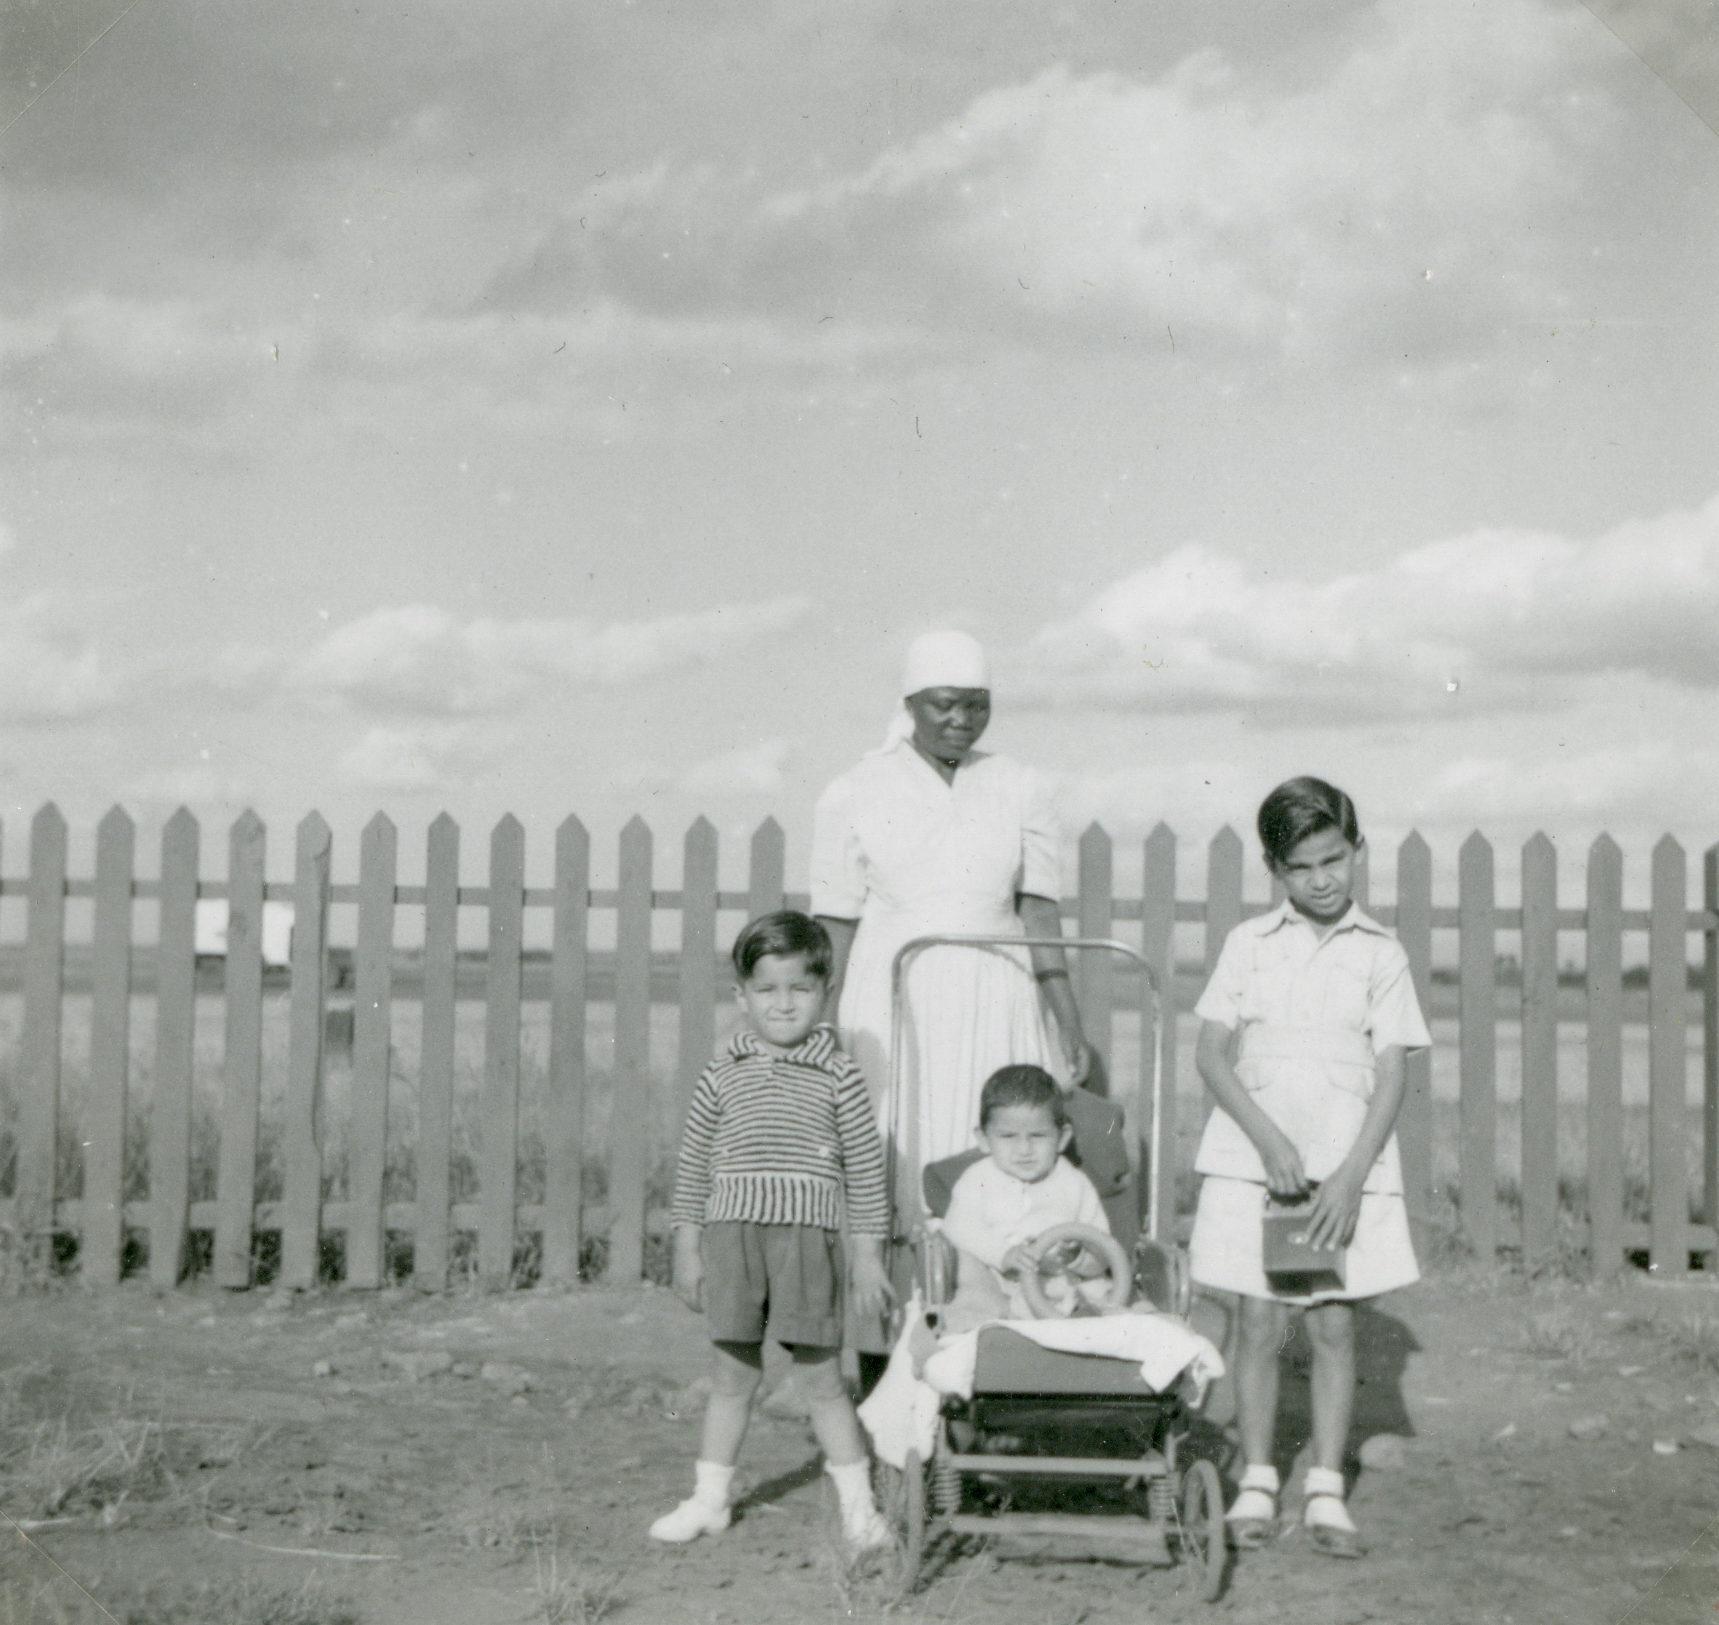 A black and white photo showing three young Asian children stand in front of a fence with an African woman in a nurse’s uniform, possibly their nanny.